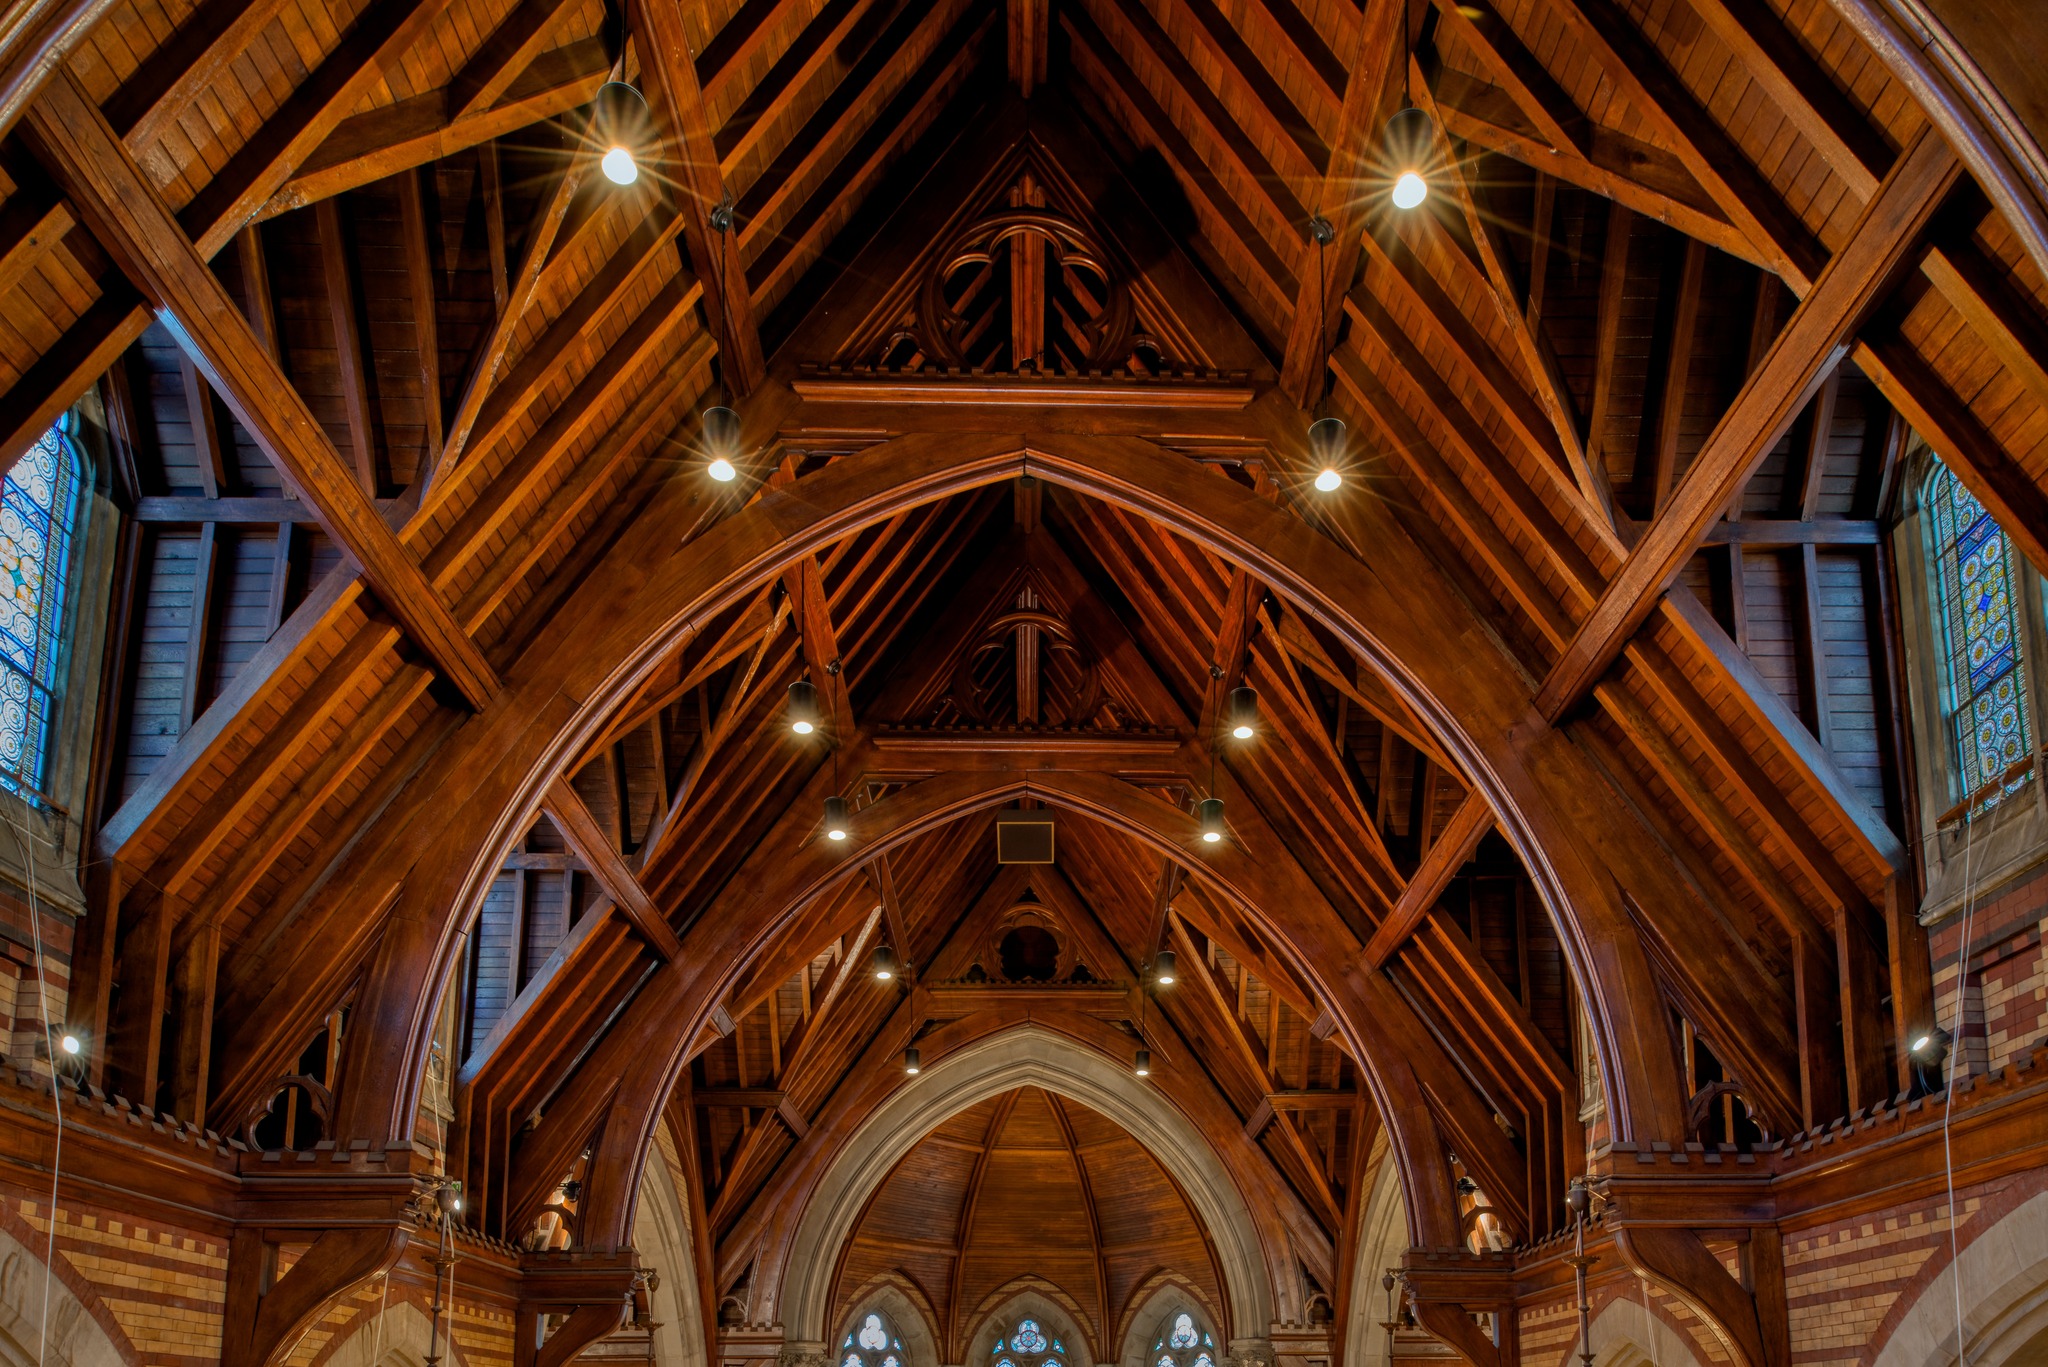 vaulted ceiling of church